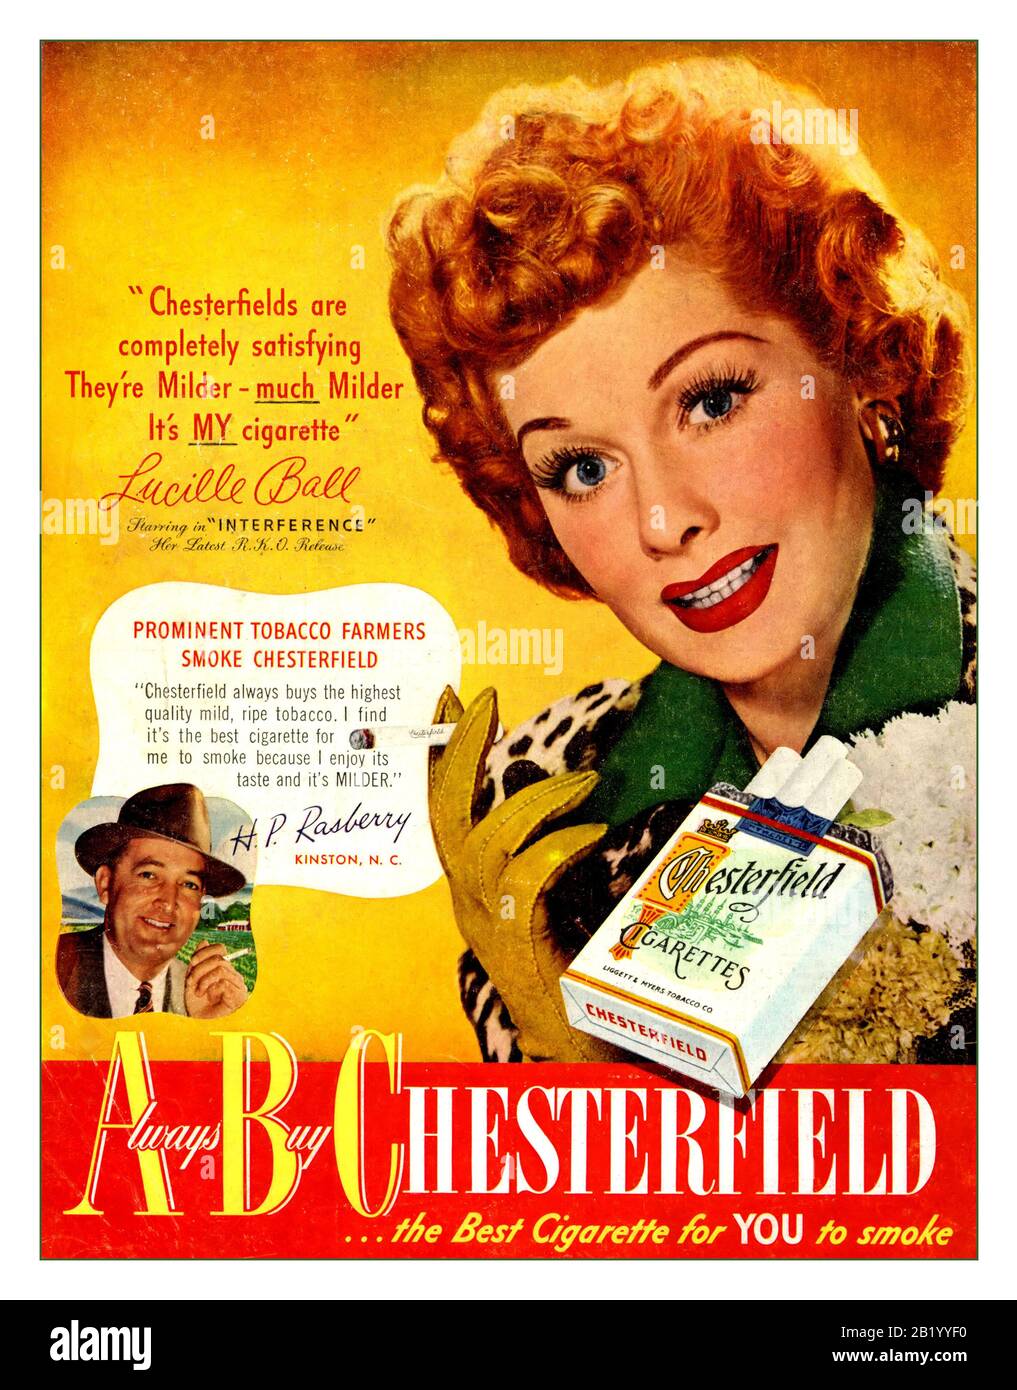 Vintage 1940’s Chesterfield Cigarette advertisement with celebrity endorsement by Lucille Ball ' Chesterfields are completely satisfying, They're Milder much Milder Its my Cigarette' Stock Photo